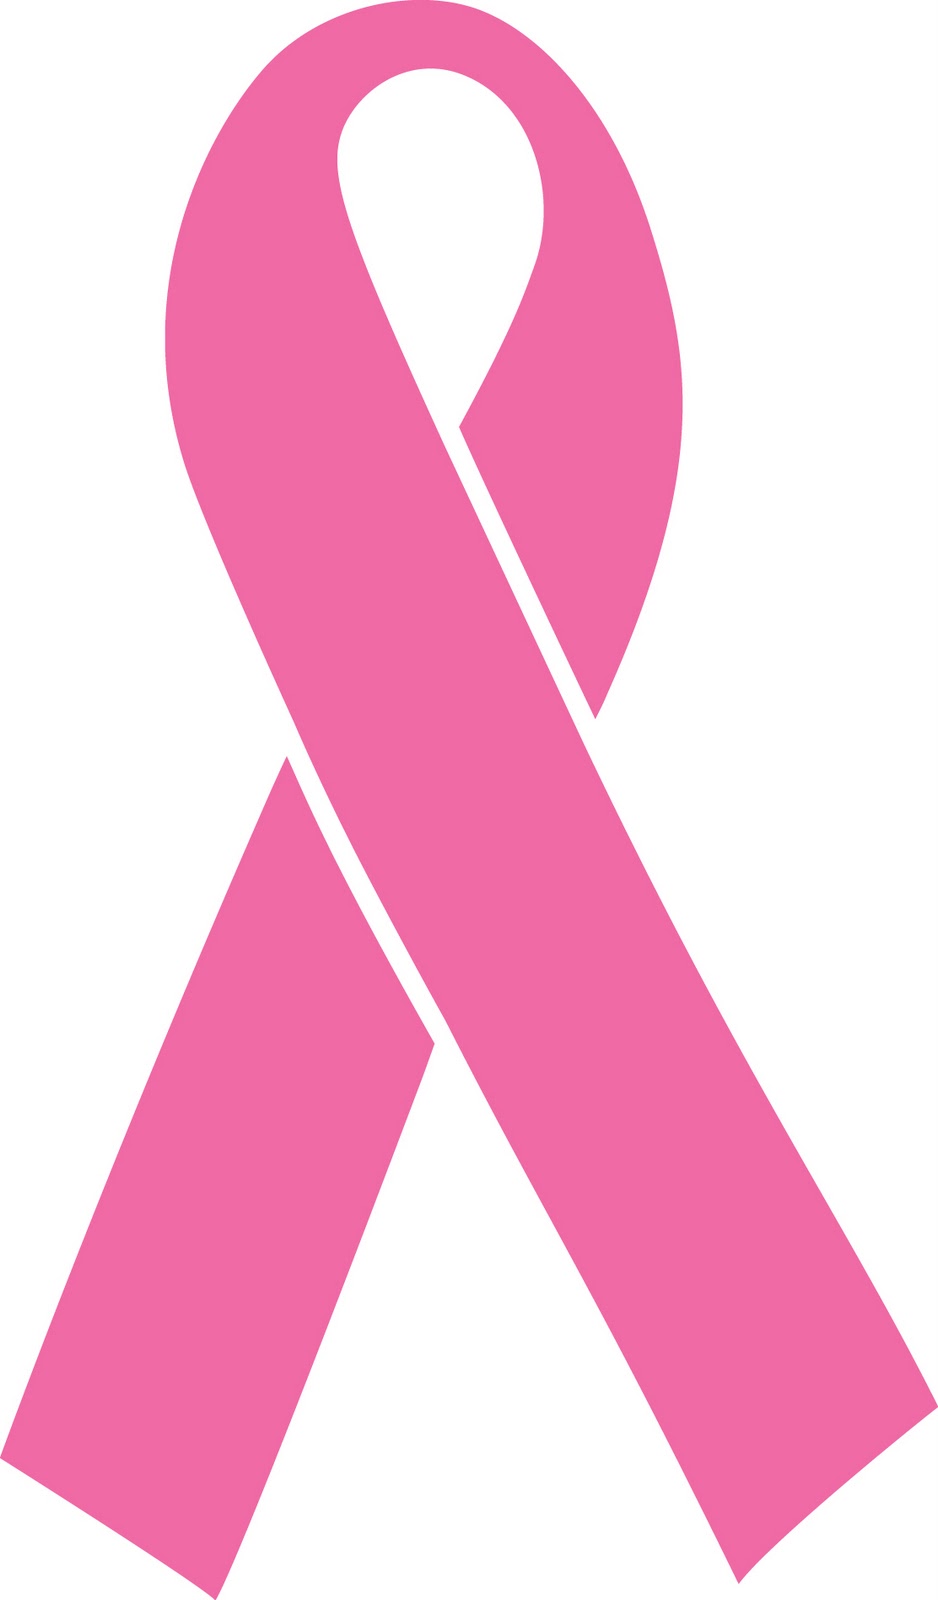 Images For > Black And White Breast Cancer Ribbon Template